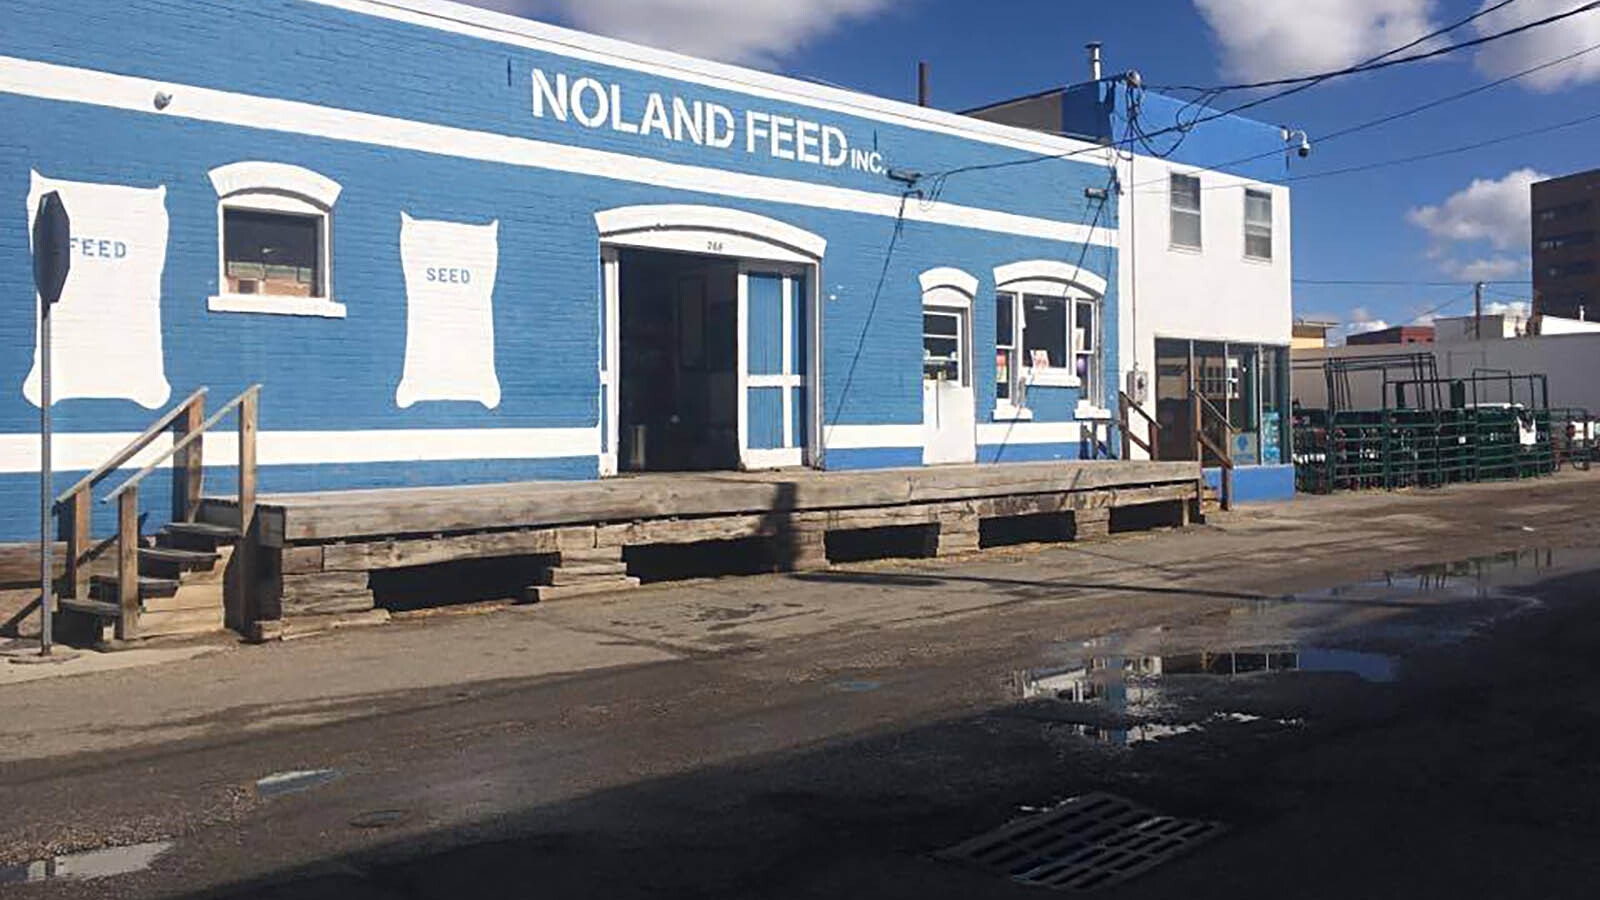 Noland Feed in Casper has been a member of the local chamber of commerce since 1917.